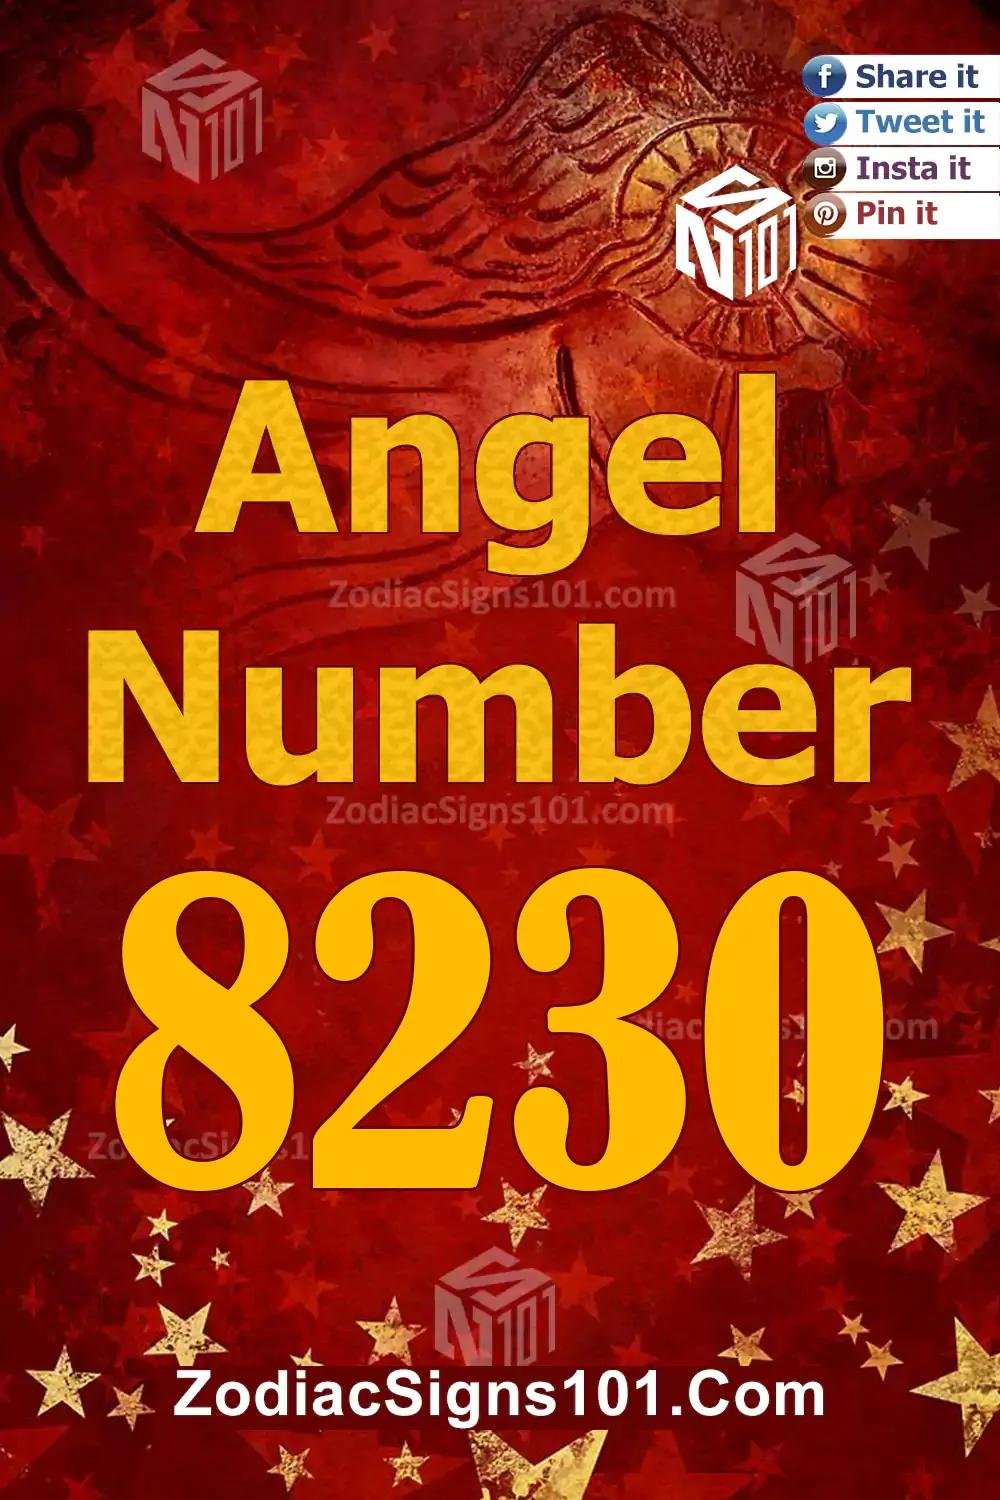 8230 Angel Number Meaning